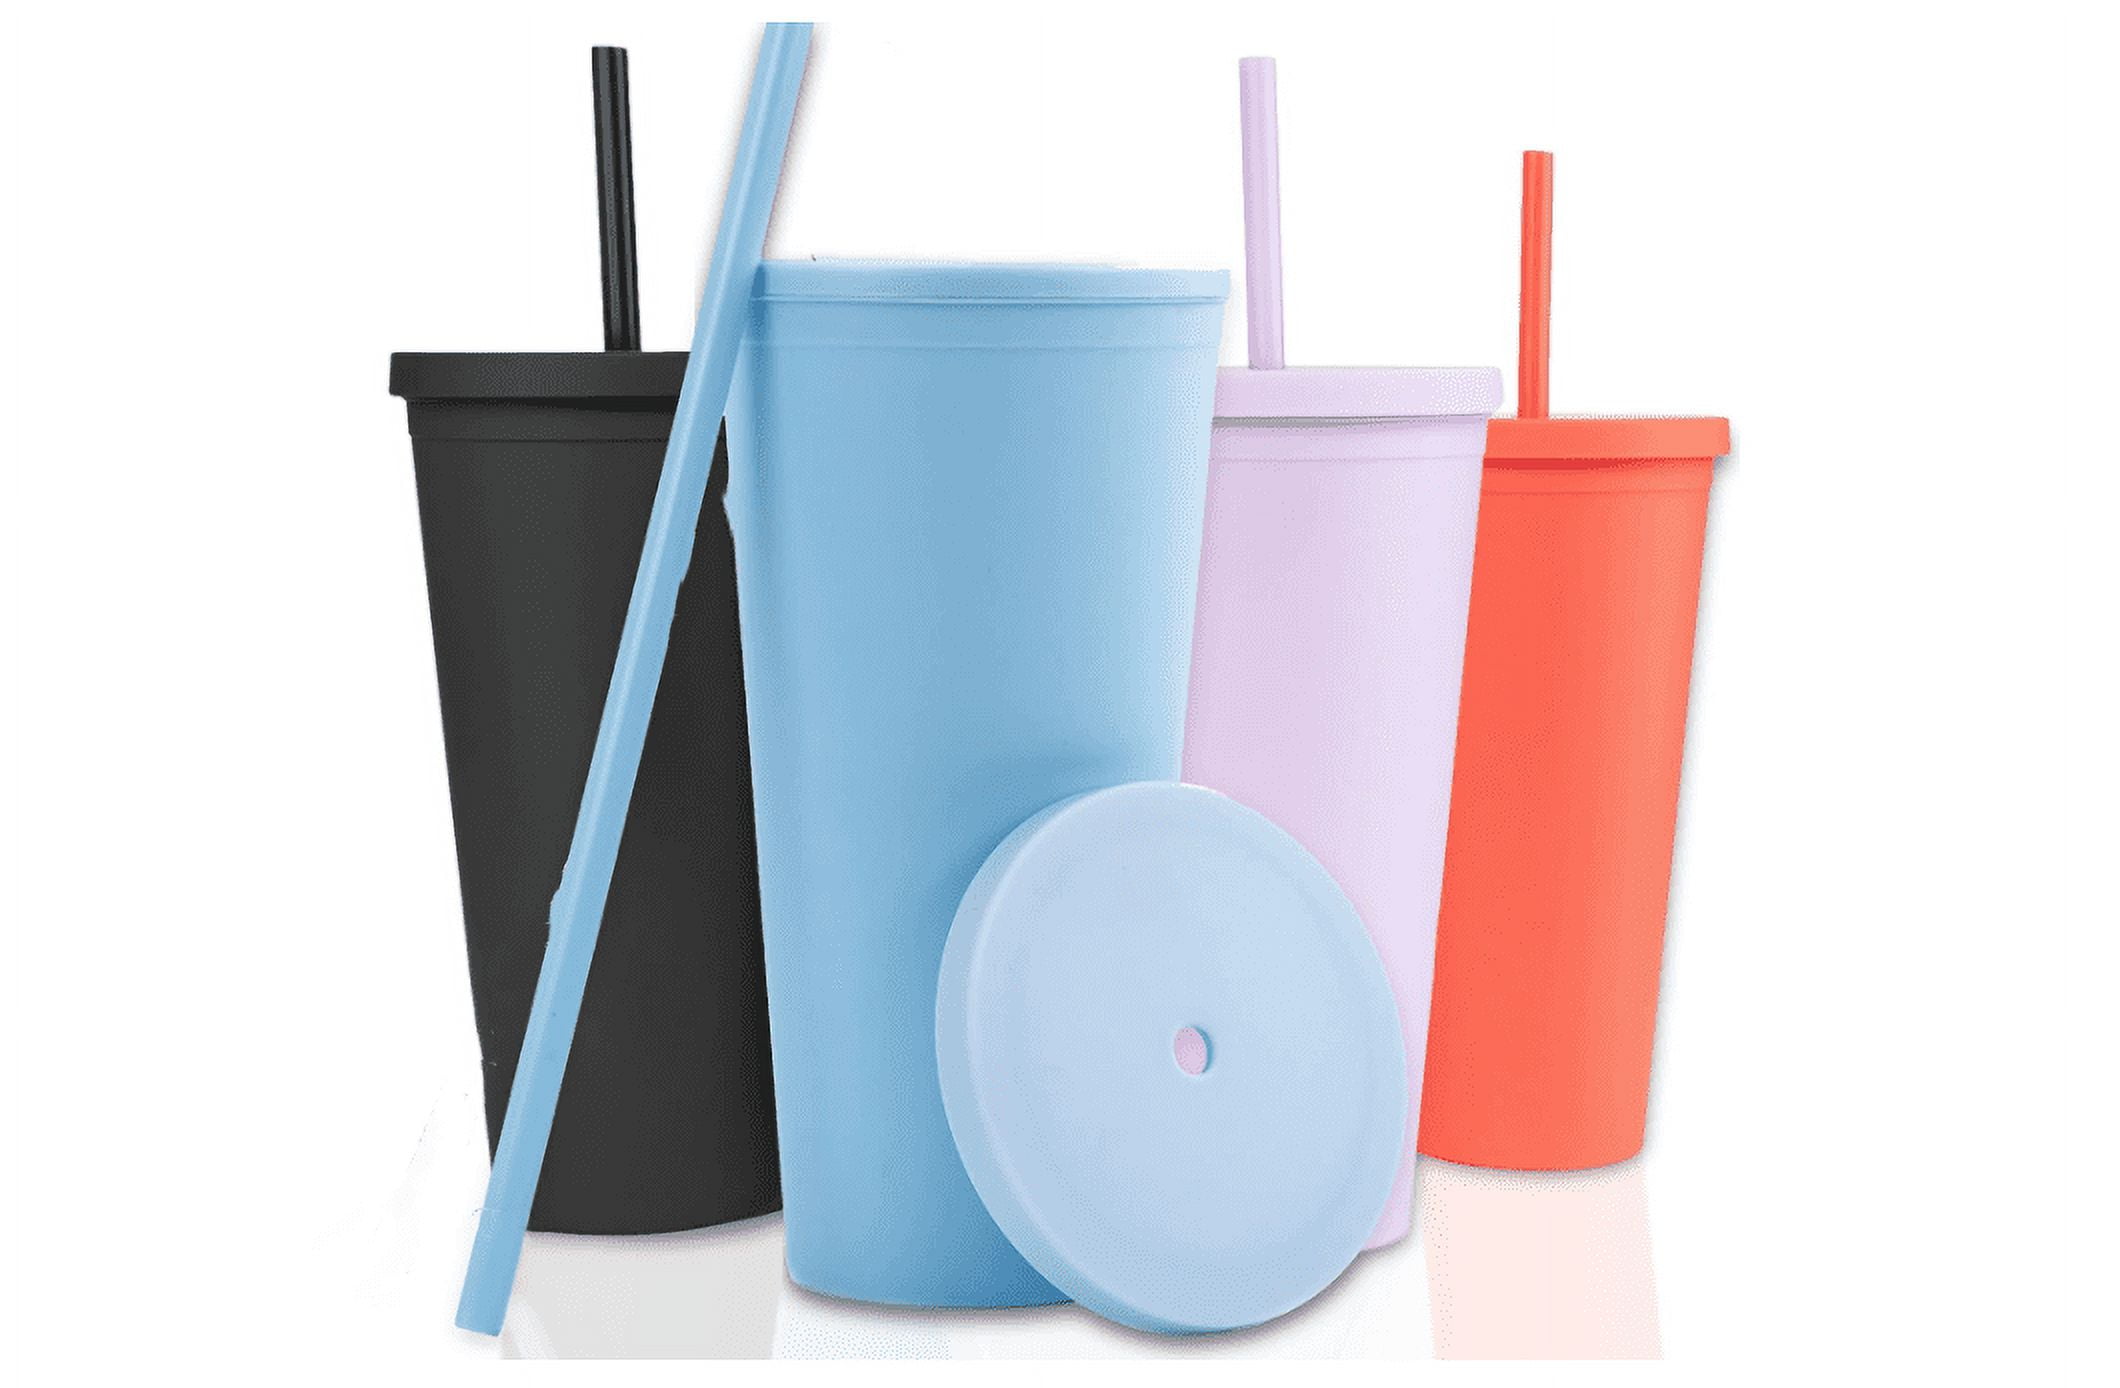 Pastel Color Mix - Pack of 12, 16 oz Acrylic Tumblers with Straws and –  Earth Drinkware